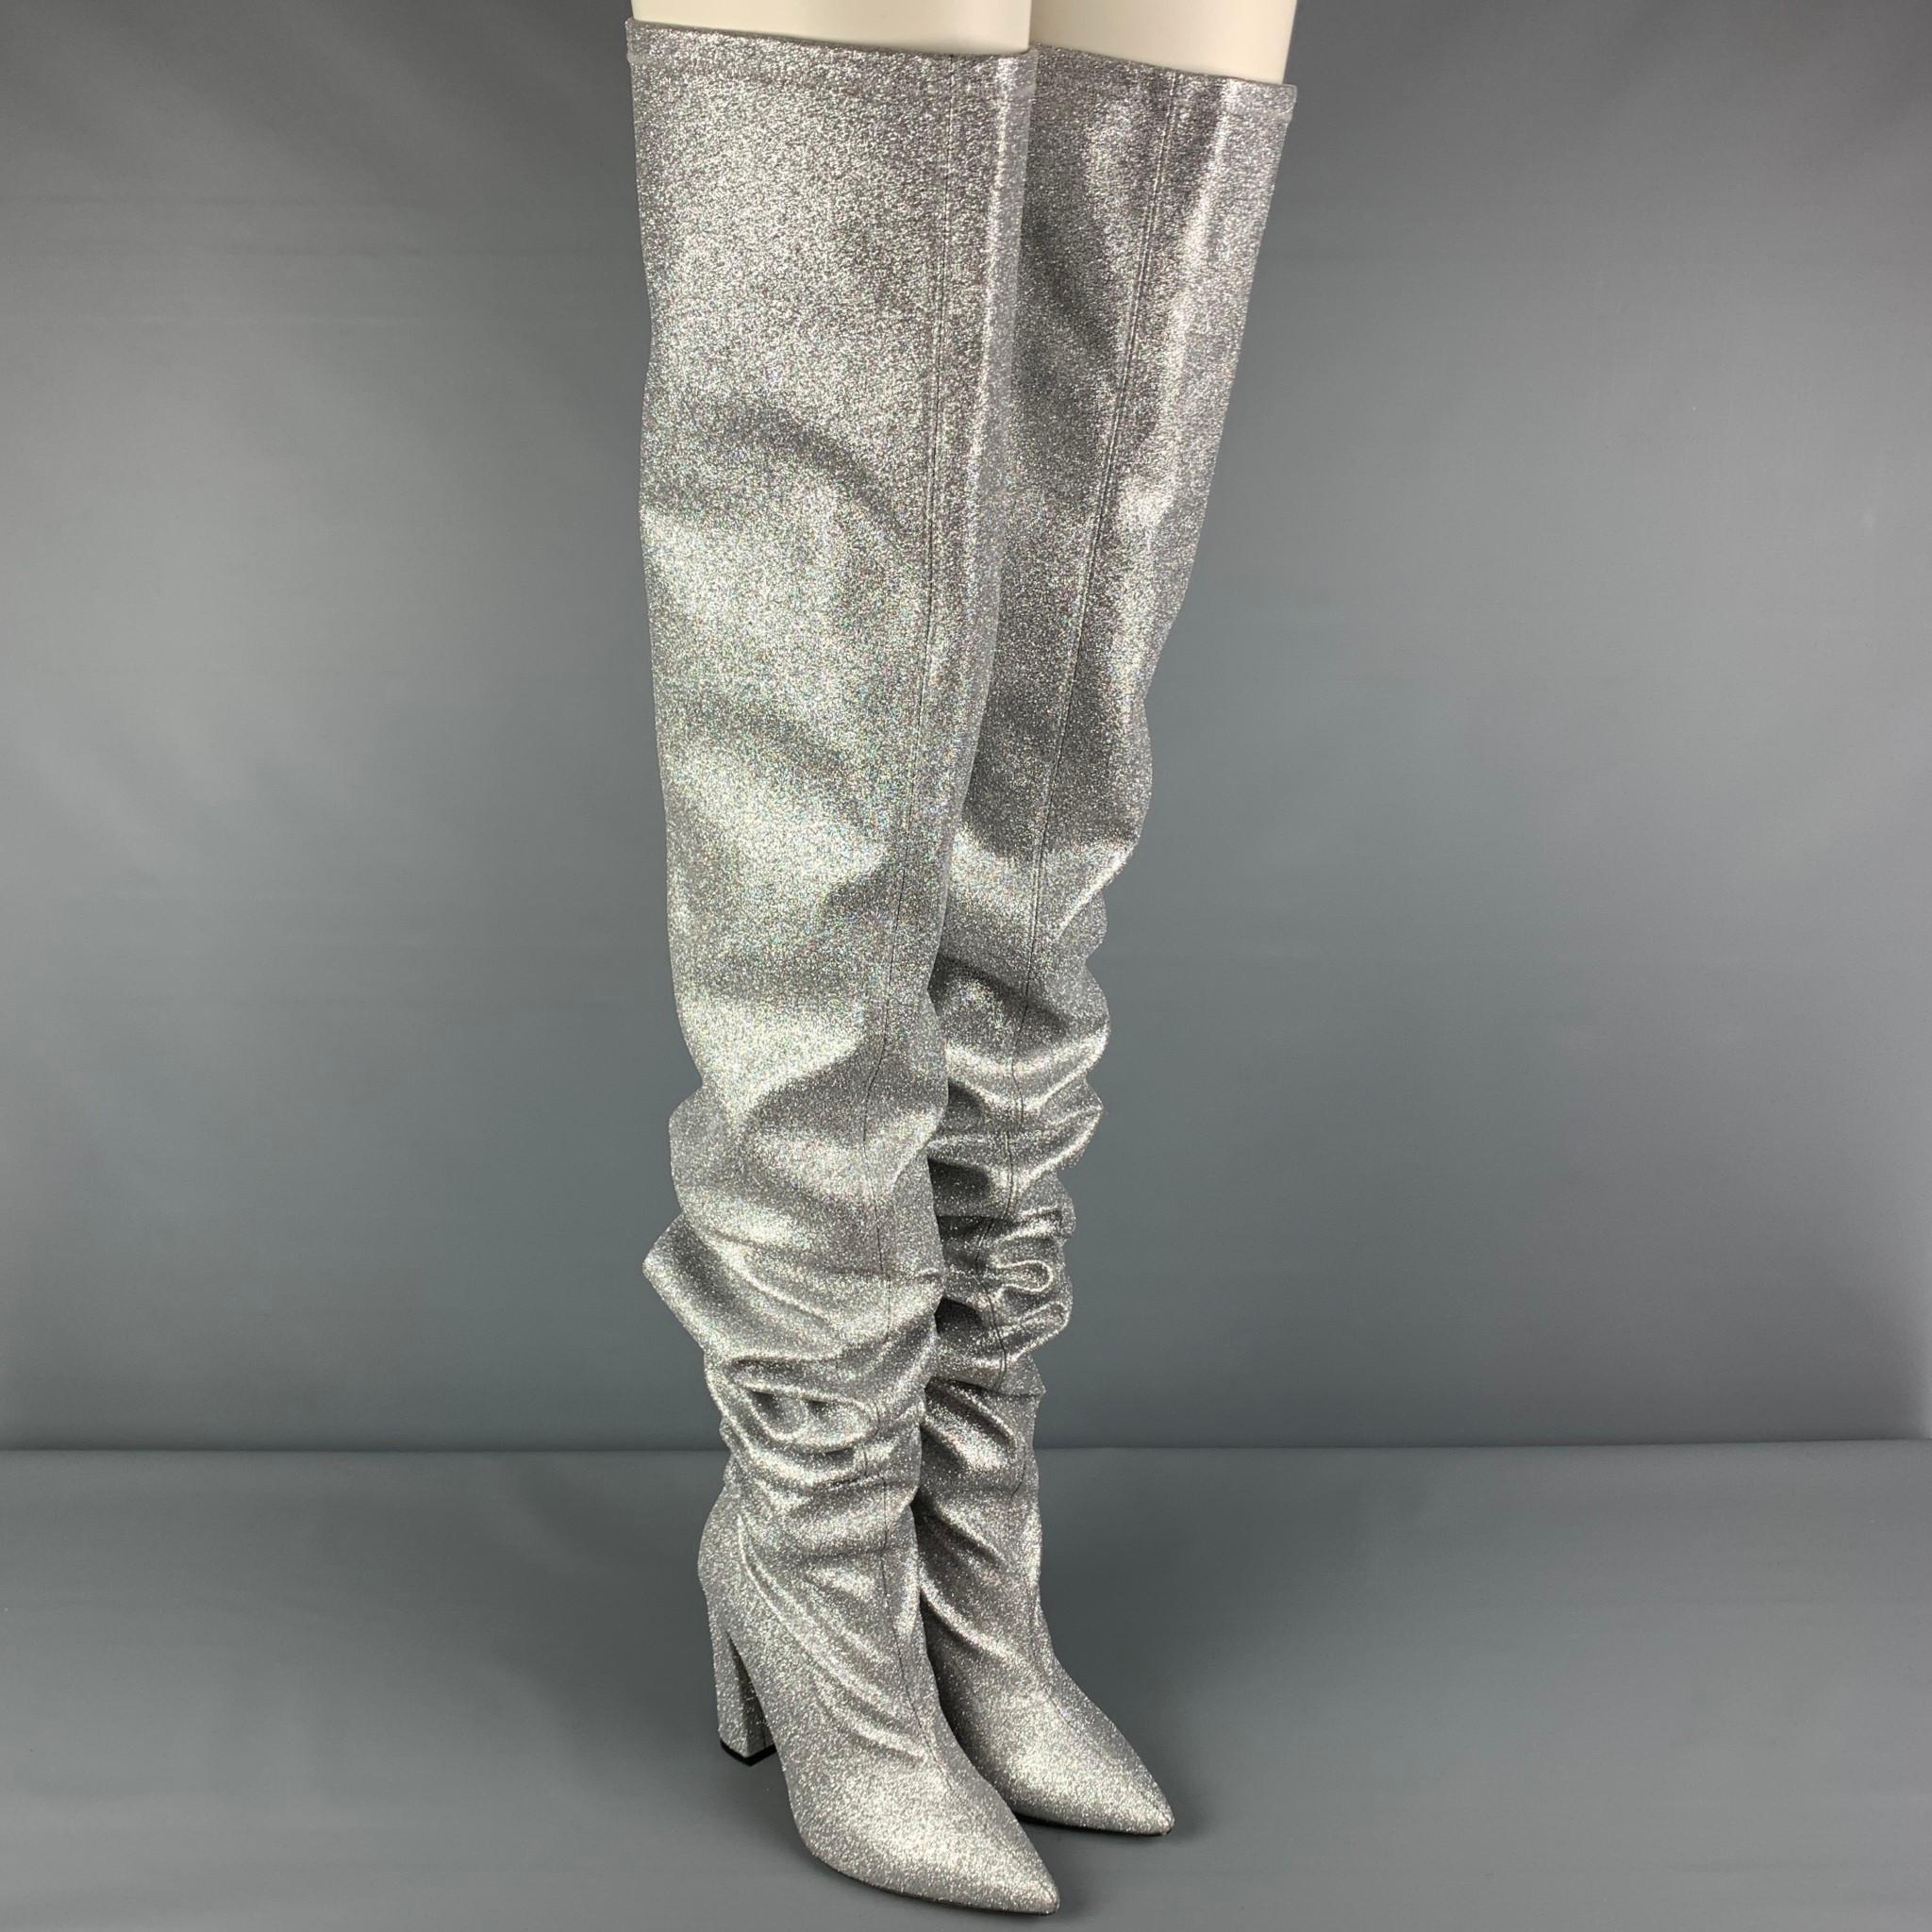 MARCELL VON BERLIN boots comes in a silver metallic glitter leather featuring a thigh high length, pointed toe, slip on, and a chunky heel. Includes box. Made in Spain.

Very Good Pre-Owned Condition.
Marked: 40
Original Retail Price: